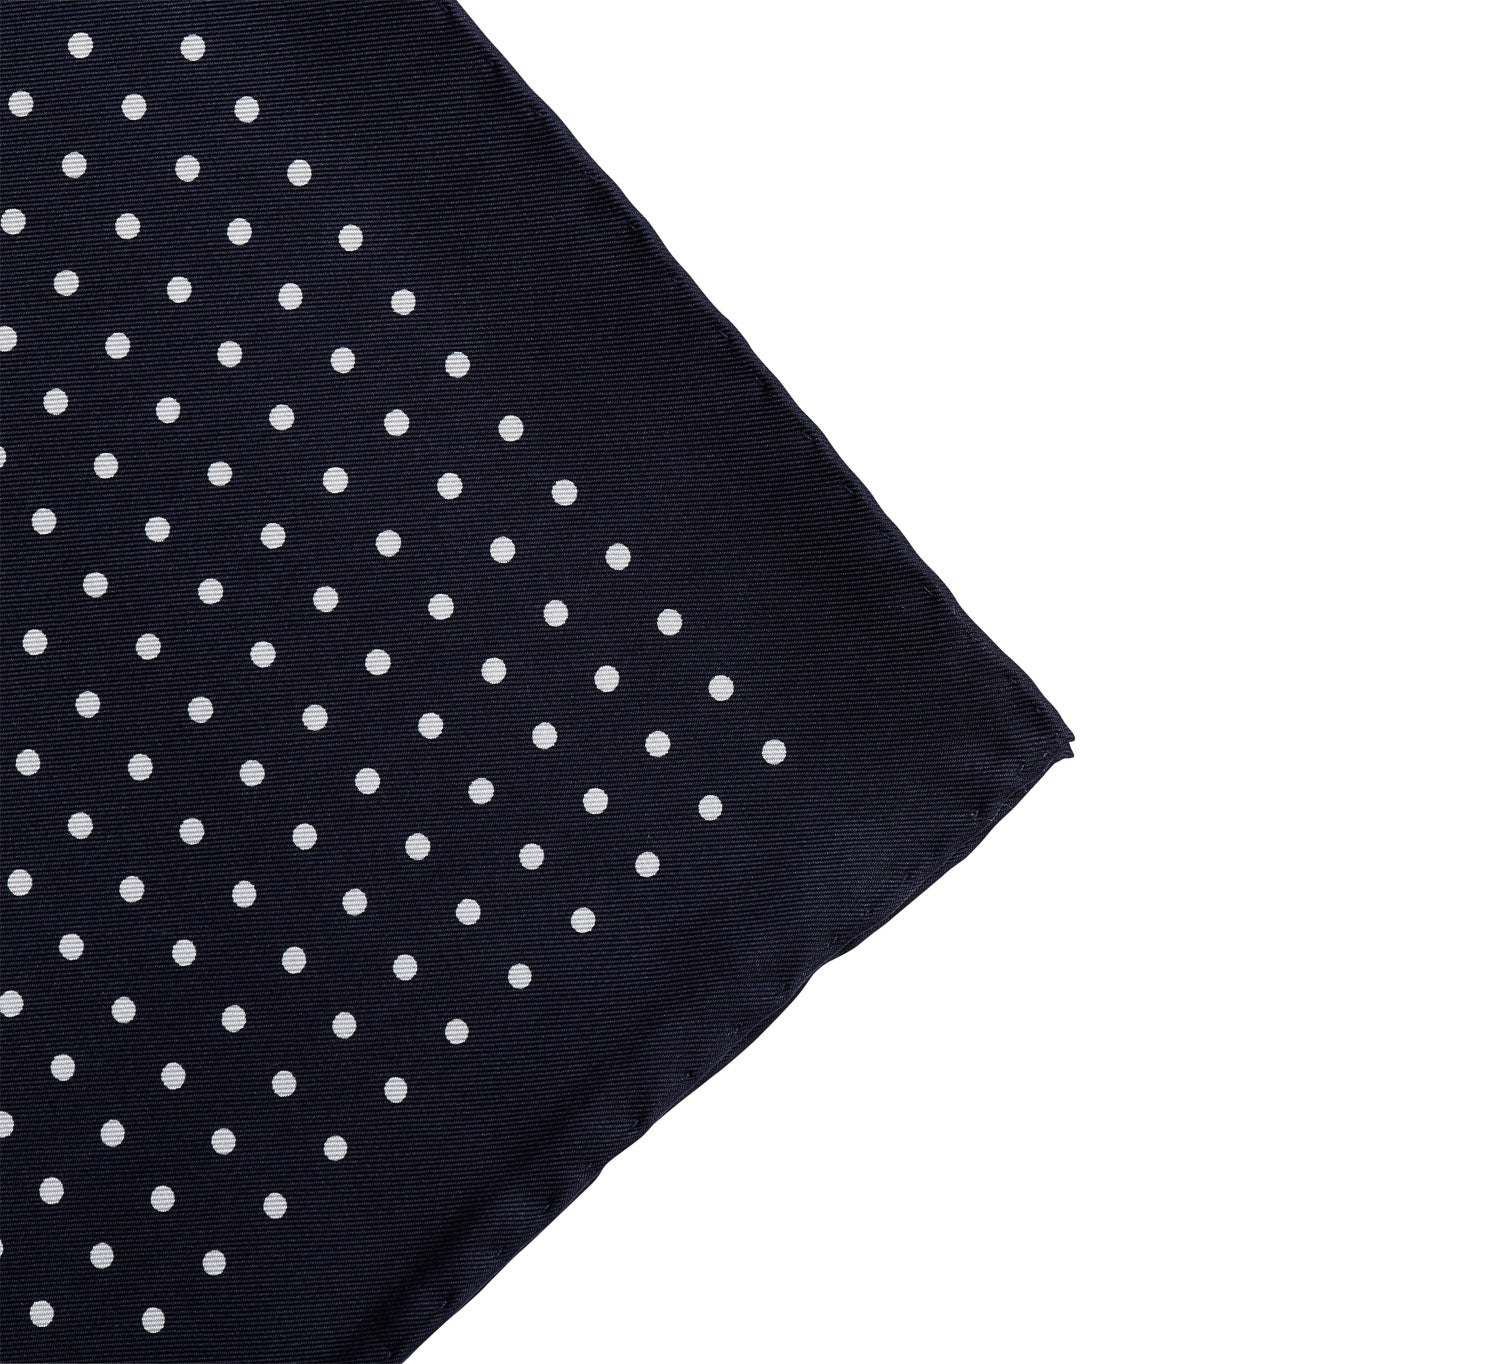 A formal Sovereign Grade 100% Silk Navy London Dot Pocket Square by KirbyAllison.com that completes any outfit.